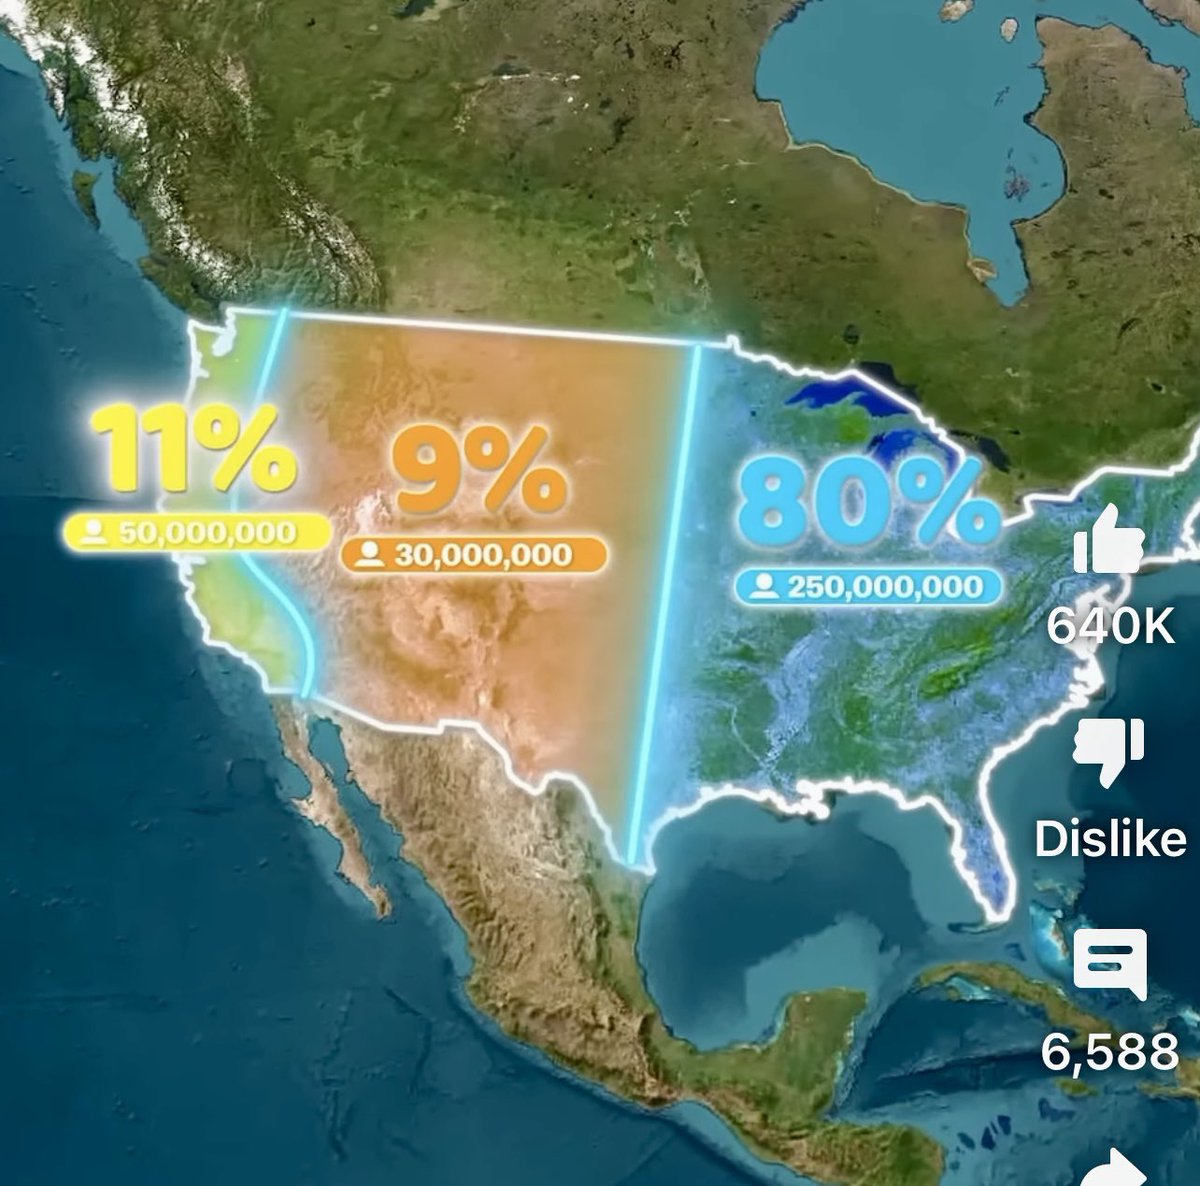 Not gonna lie, I found this population breakdown of the US to be fascinating (and well done video technically): youtube.com/shorts/p5DfhG_…